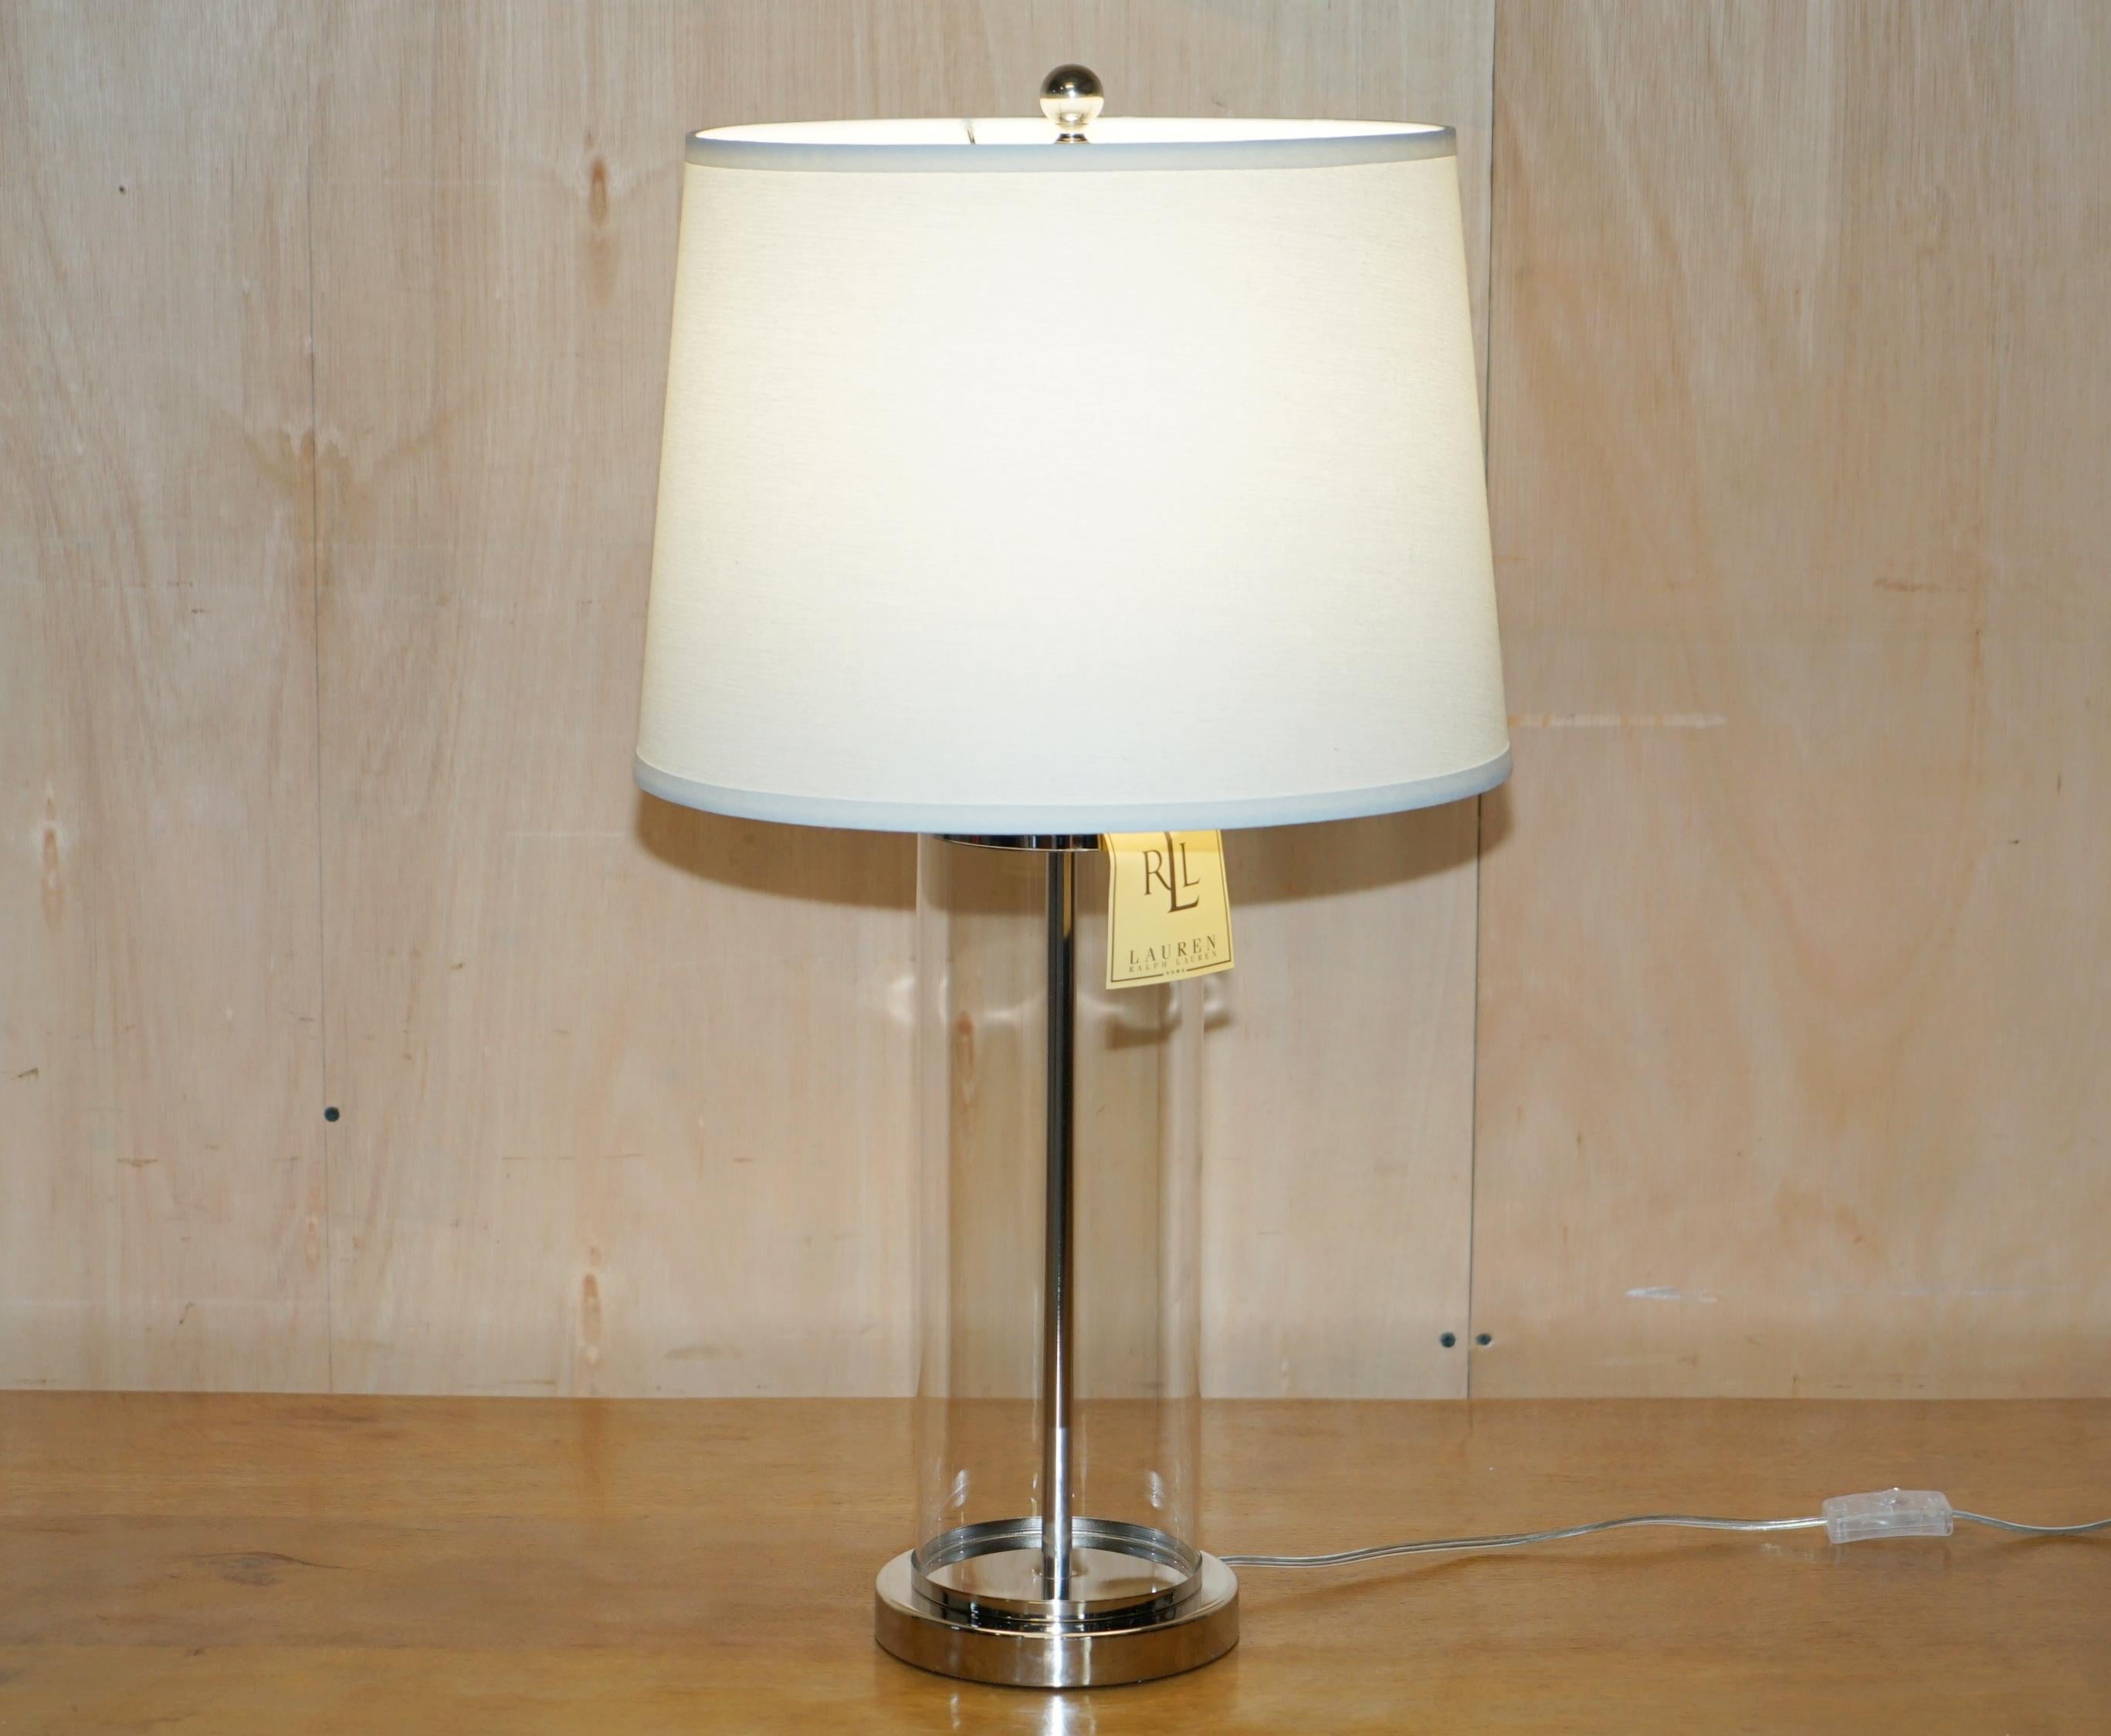 Royal House Antiques

Royal House Antiques is delighted to offer for sale 1 of 2 brand new in the original box Ralph Lauren storm lantern glass cylinder table lamps

This lamp is part of a massive suite of Ralph Lauren lamps we bought for a show